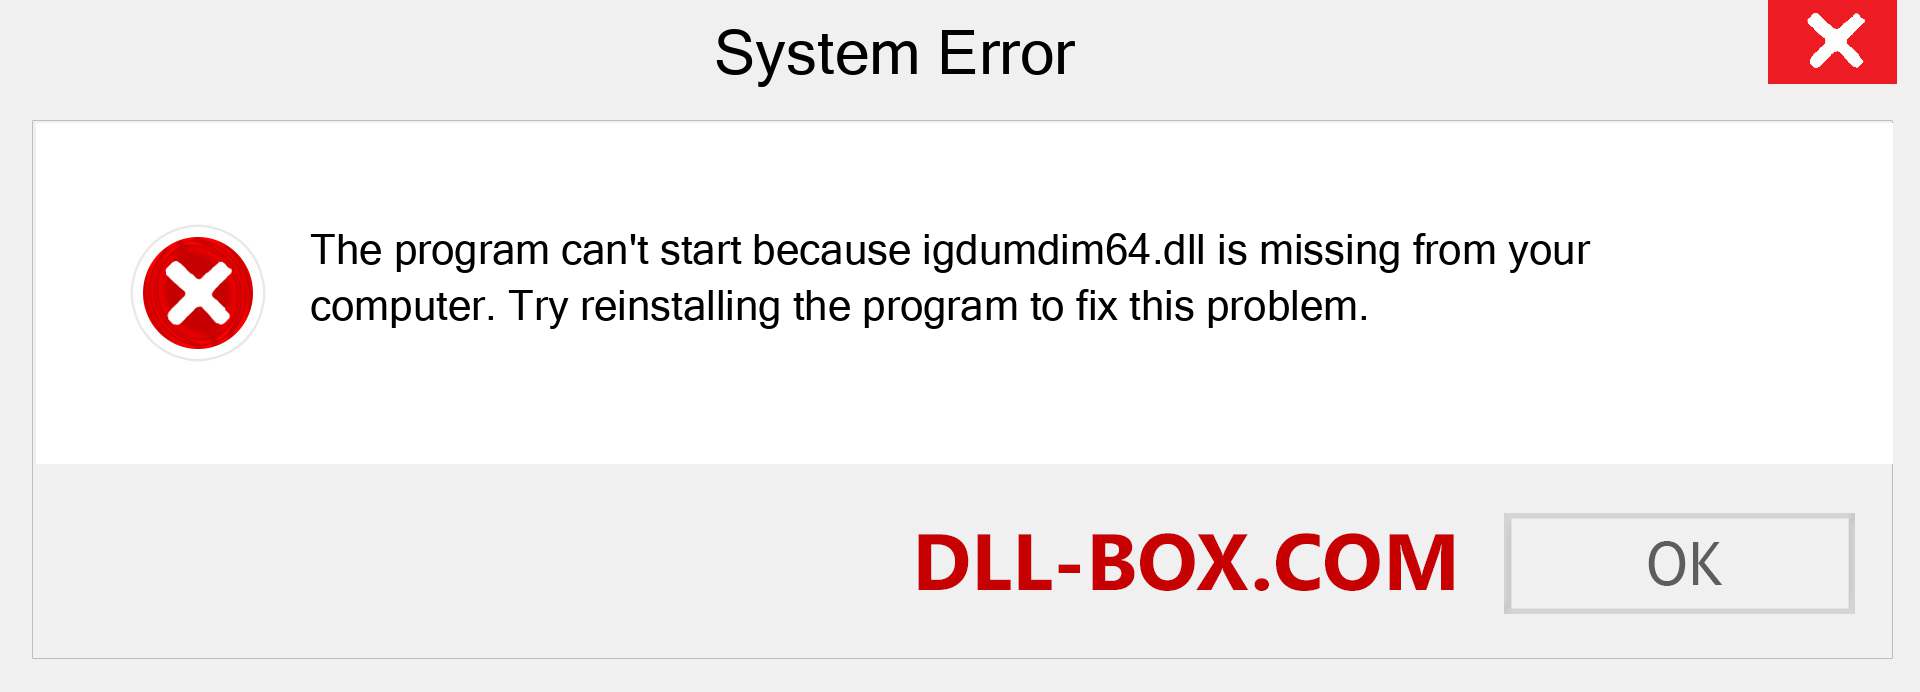  igdumdim64.dll file is missing?. Download for Windows 7, 8, 10 - Fix  igdumdim64 dll Missing Error on Windows, photos, images